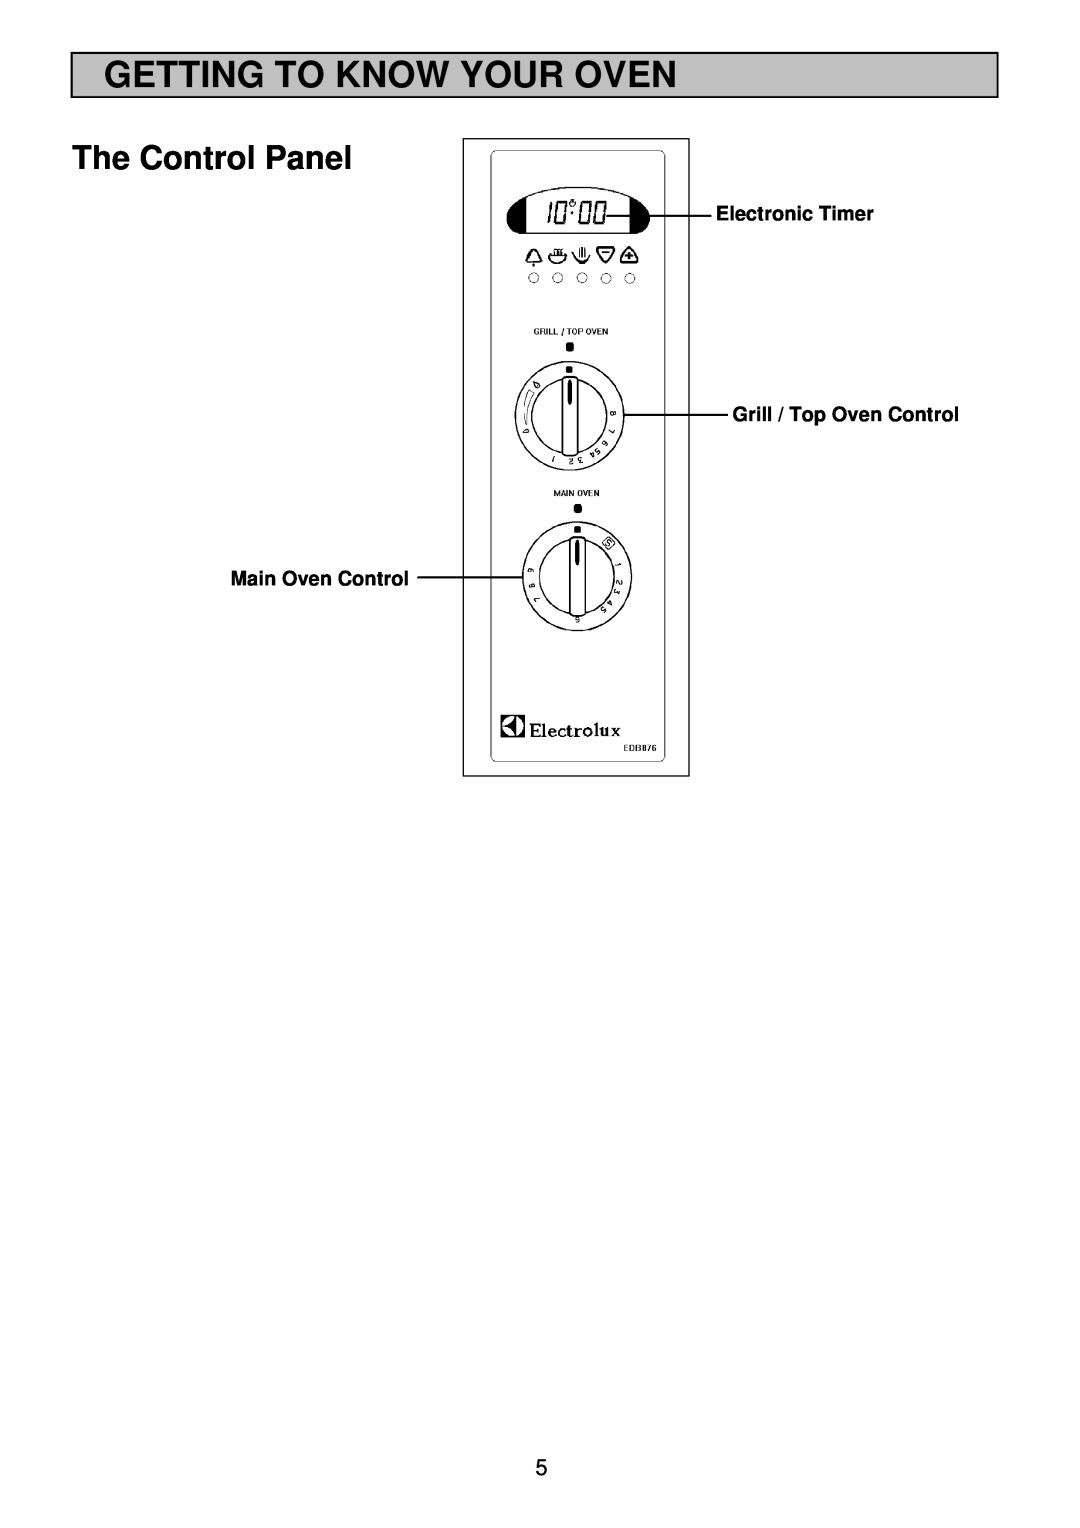 Electrolux EDB 876 manual Getting To Know Your Oven, The Control Panel, Main Oven Control 